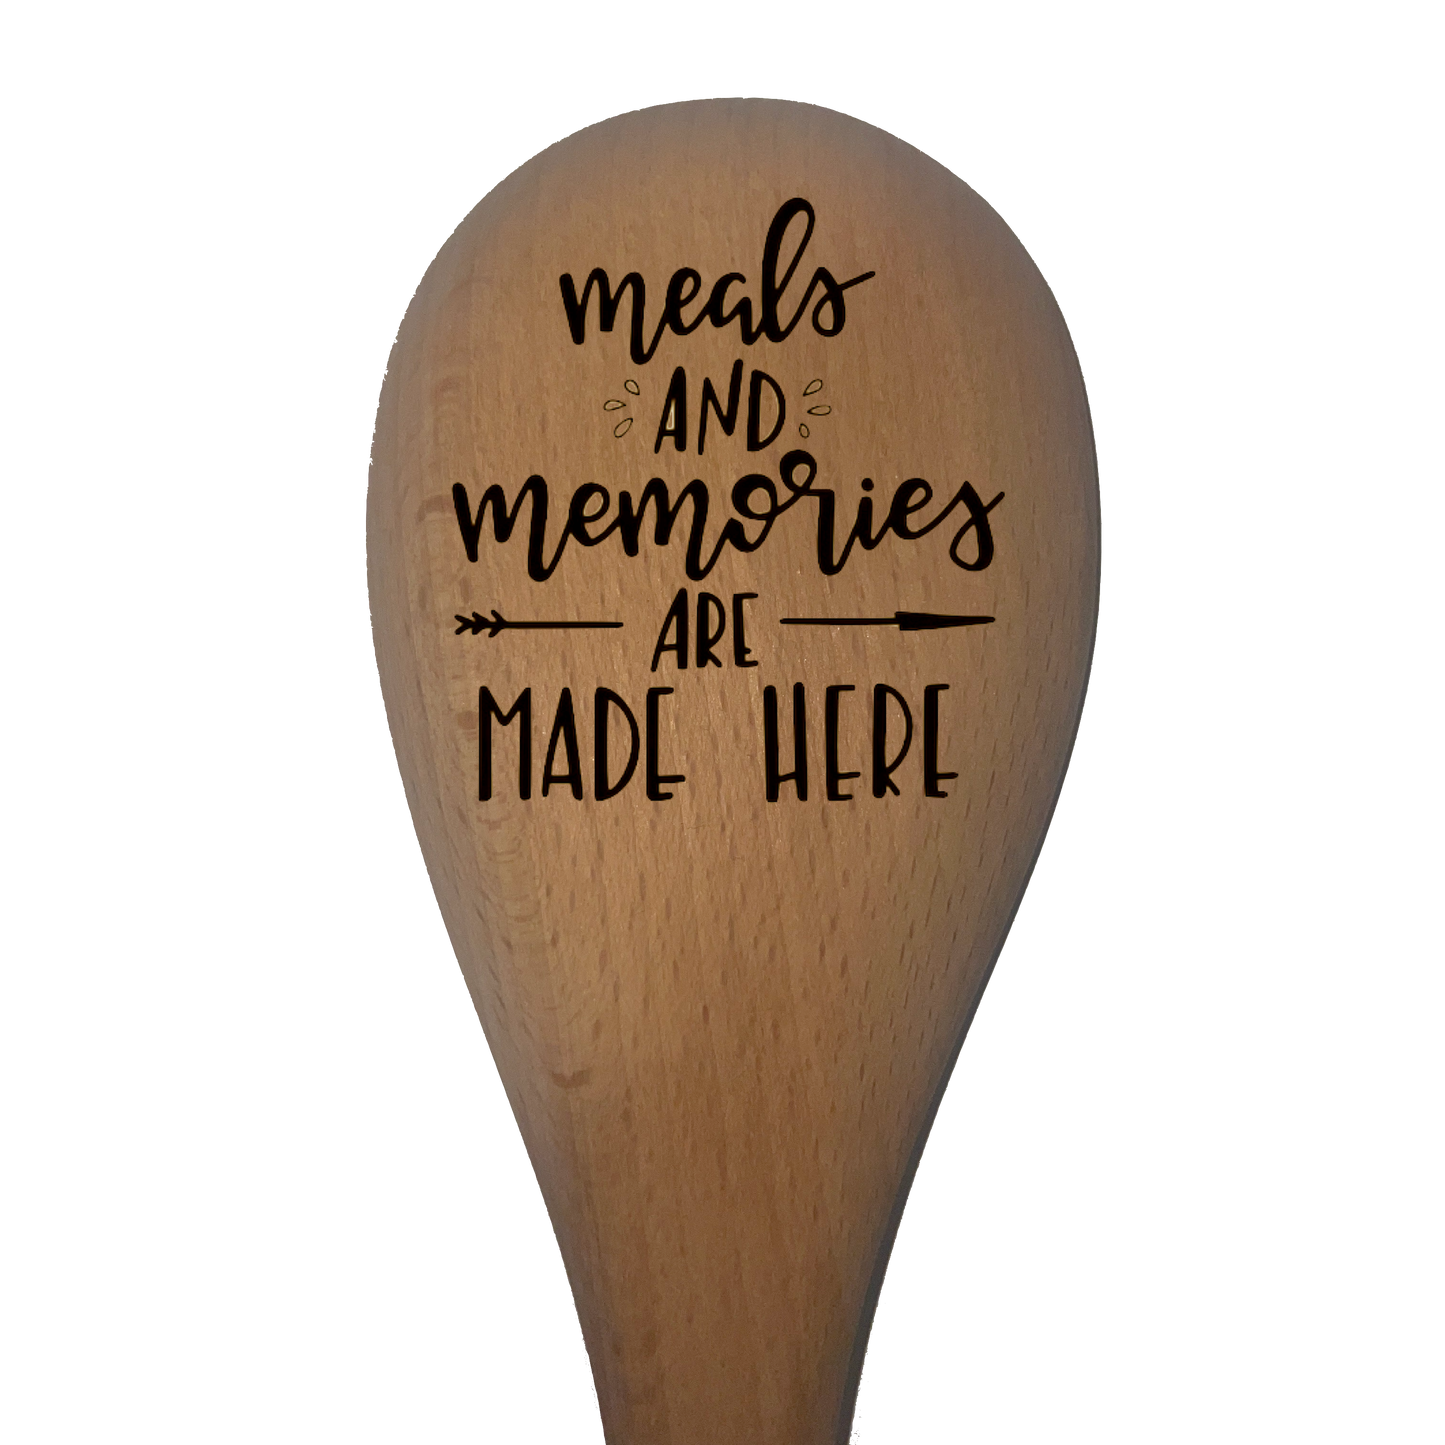 Meals and Memories Are Made Here - Spoon